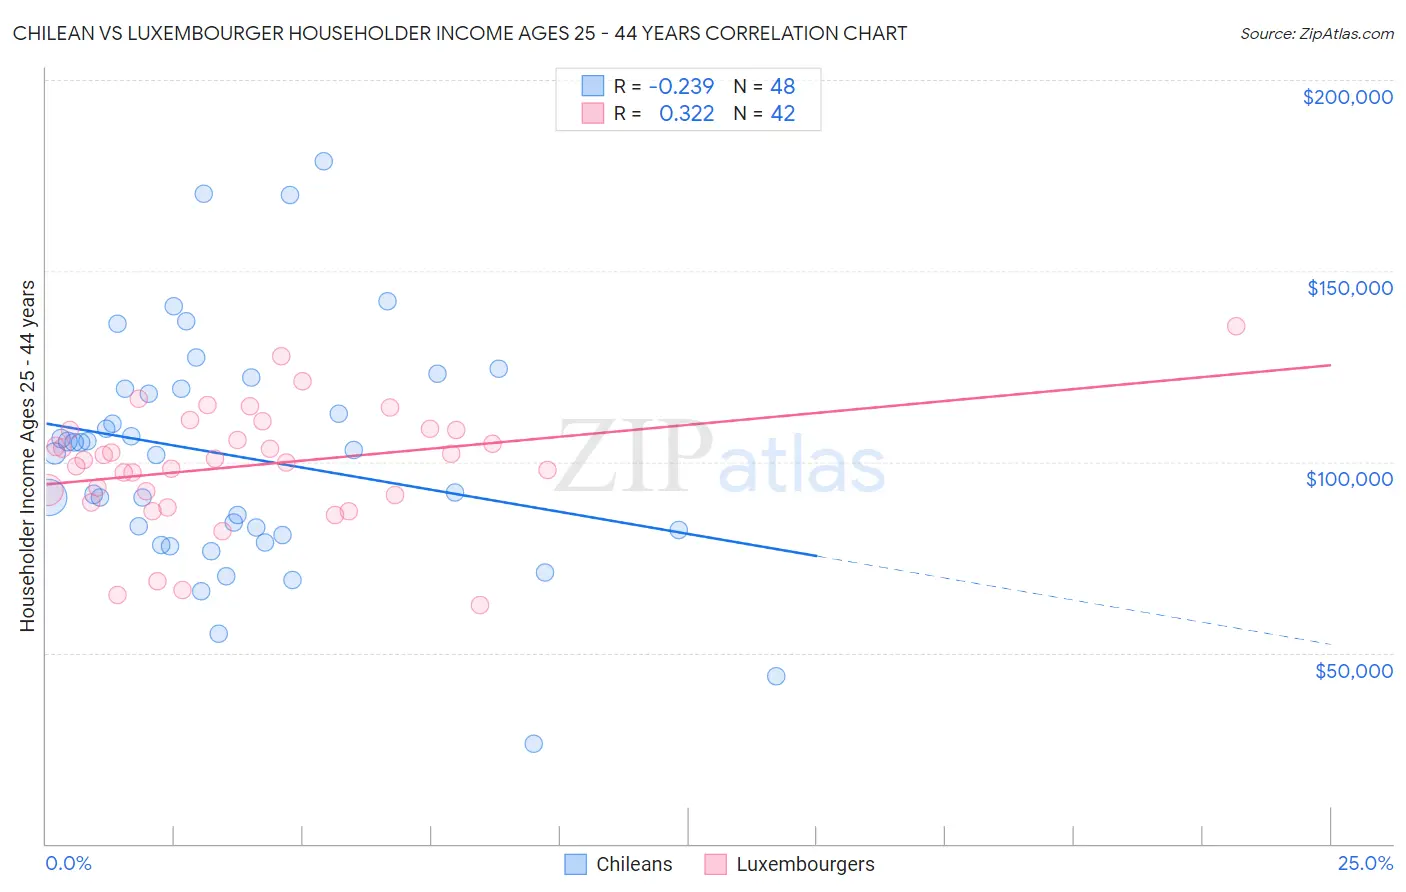 Chilean vs Luxembourger Householder Income Ages 25 - 44 years